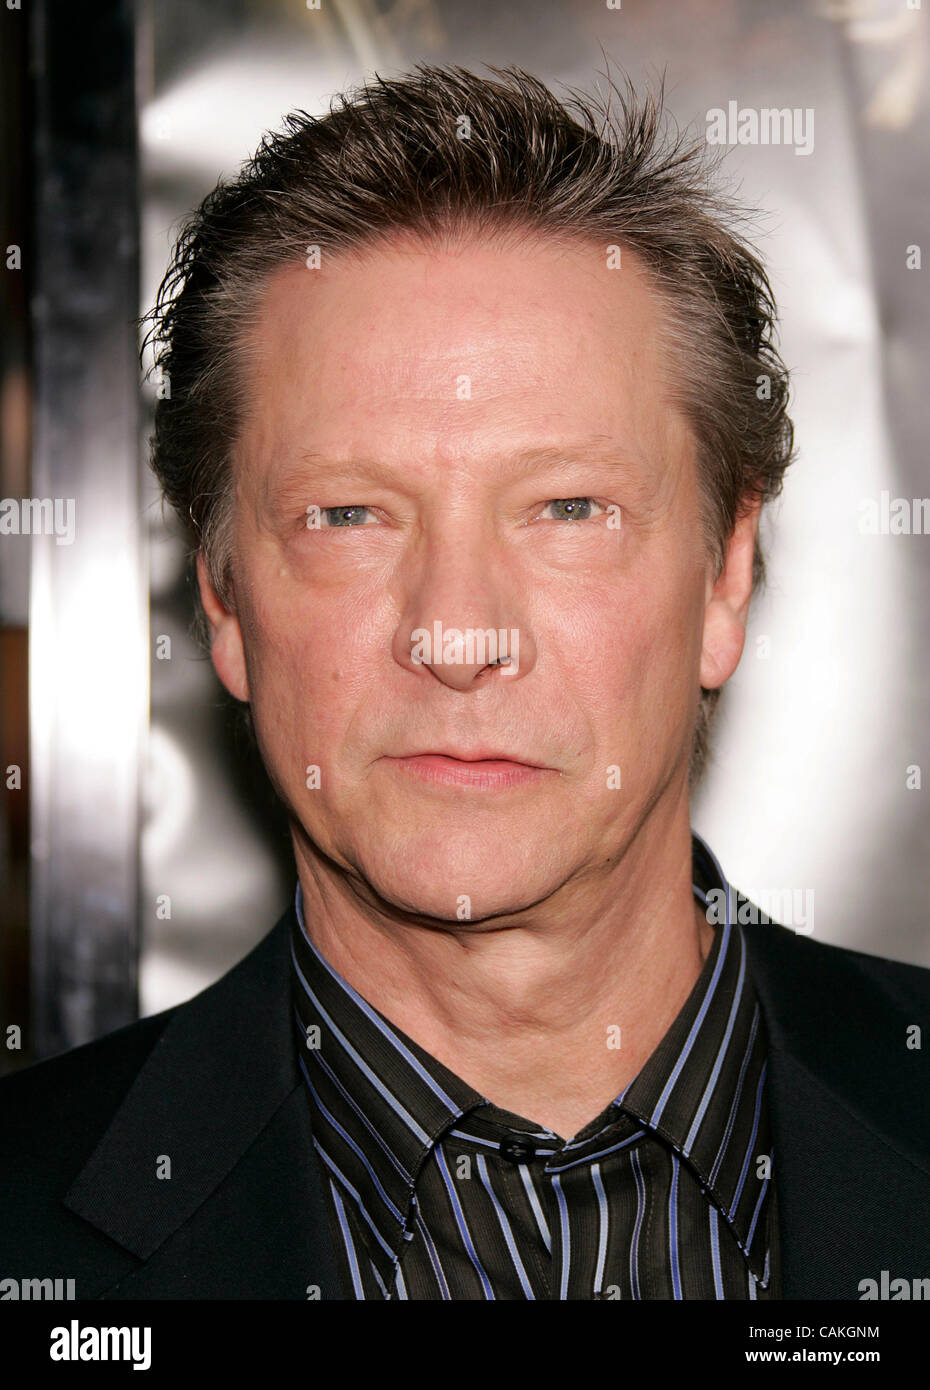 Sep 17, 2007 - Westwood, California, USA - Actor CHRIS COOPER at 'The Kingdom' Los Angeles Premiere held at the Mann Village Theatre. (Credit Image: © Lisa O'Connor/ZUMA Press) Stock Photo